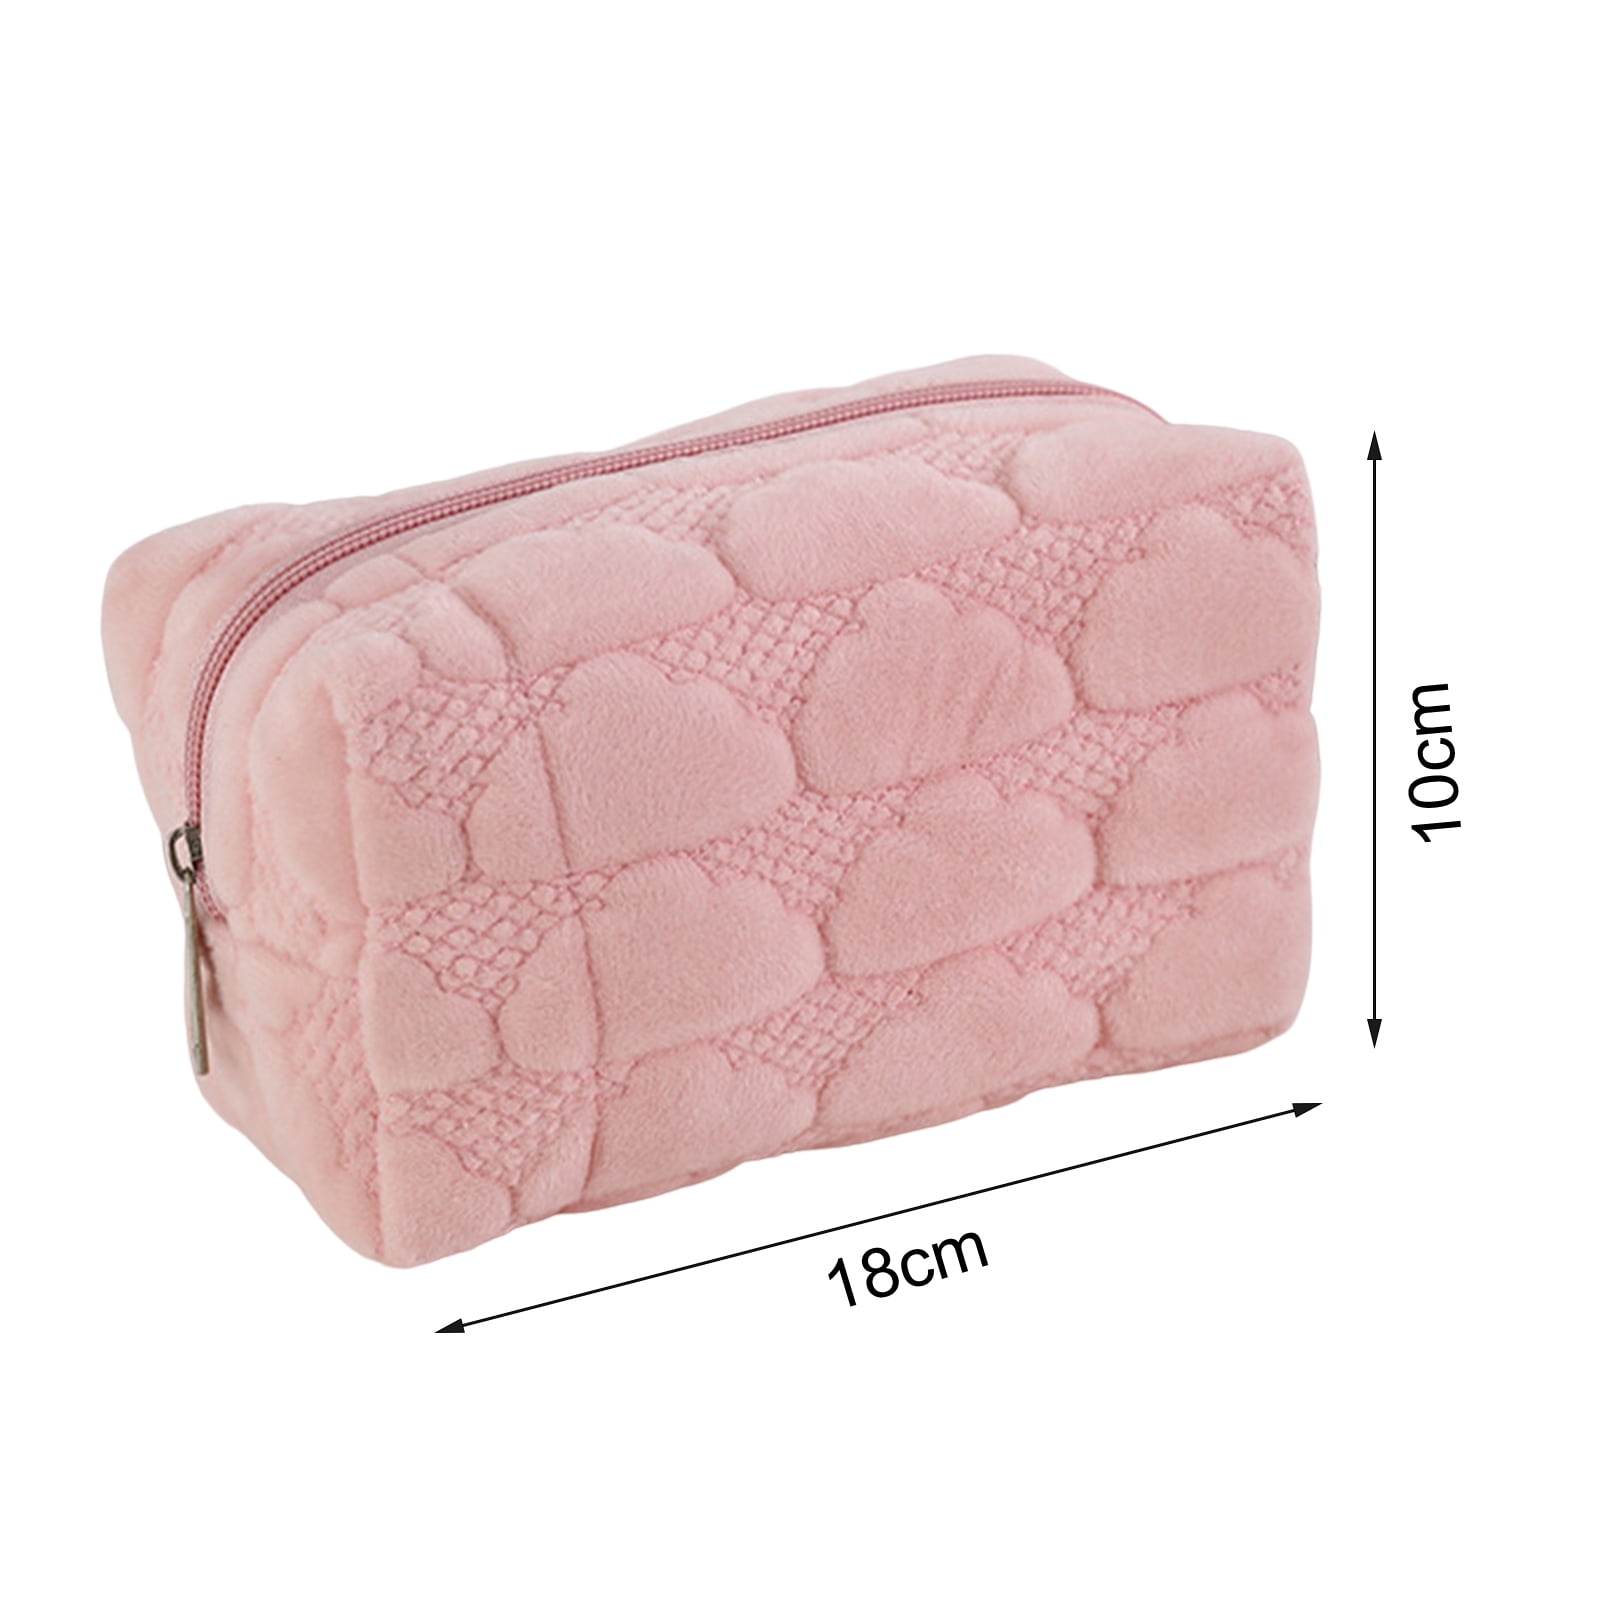 Makeup Bag High Capacity Comfortable Touch Dust-proof Portable Cloud Shape Soft  Plush Cosmetic Handbag for Daily Use,White 